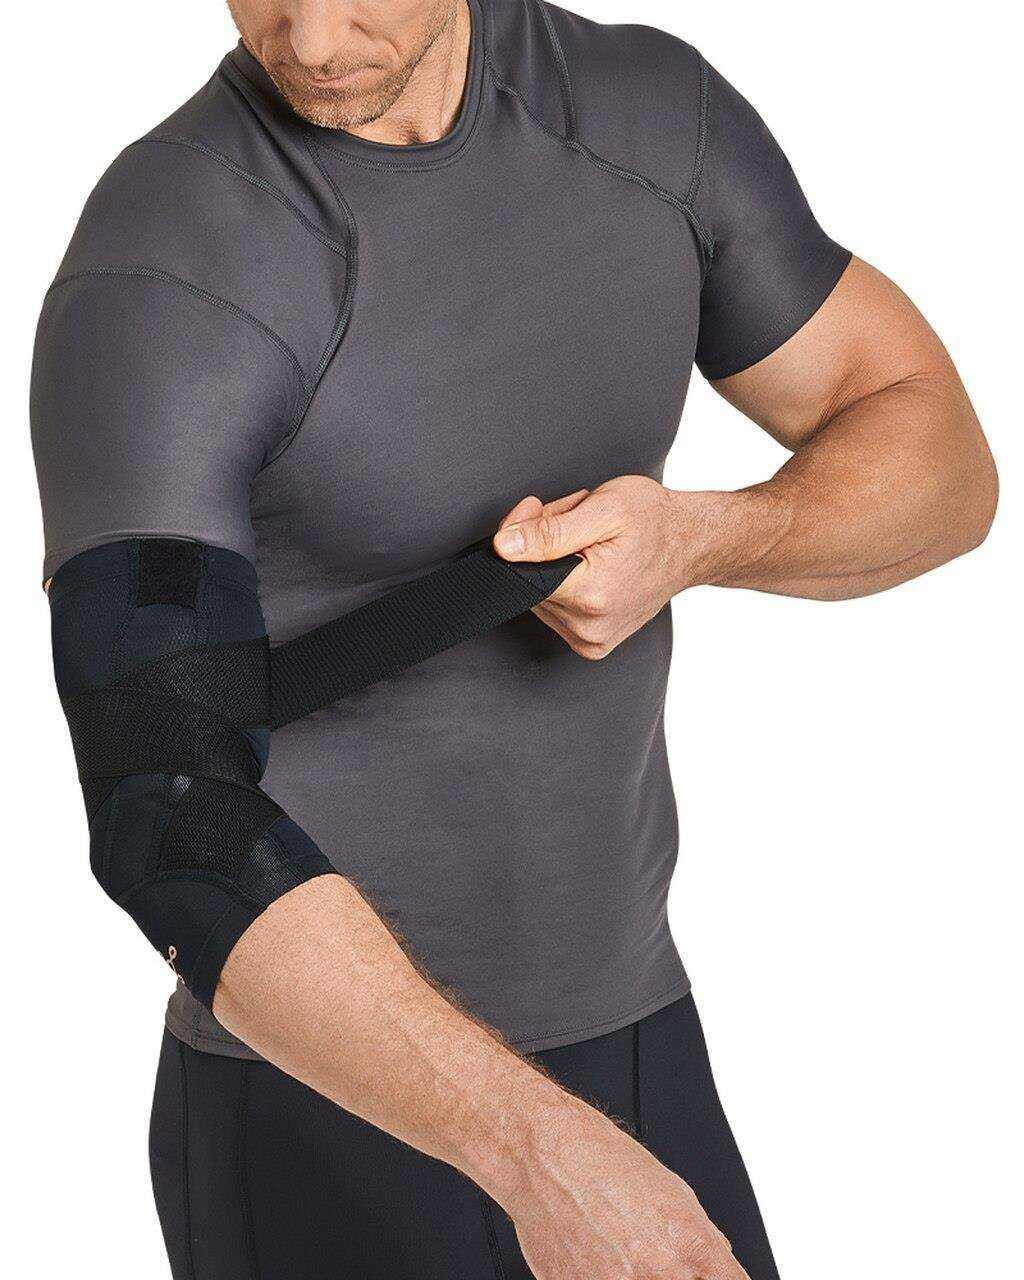 Elbow Compression Sleeve, Ease Pain Now